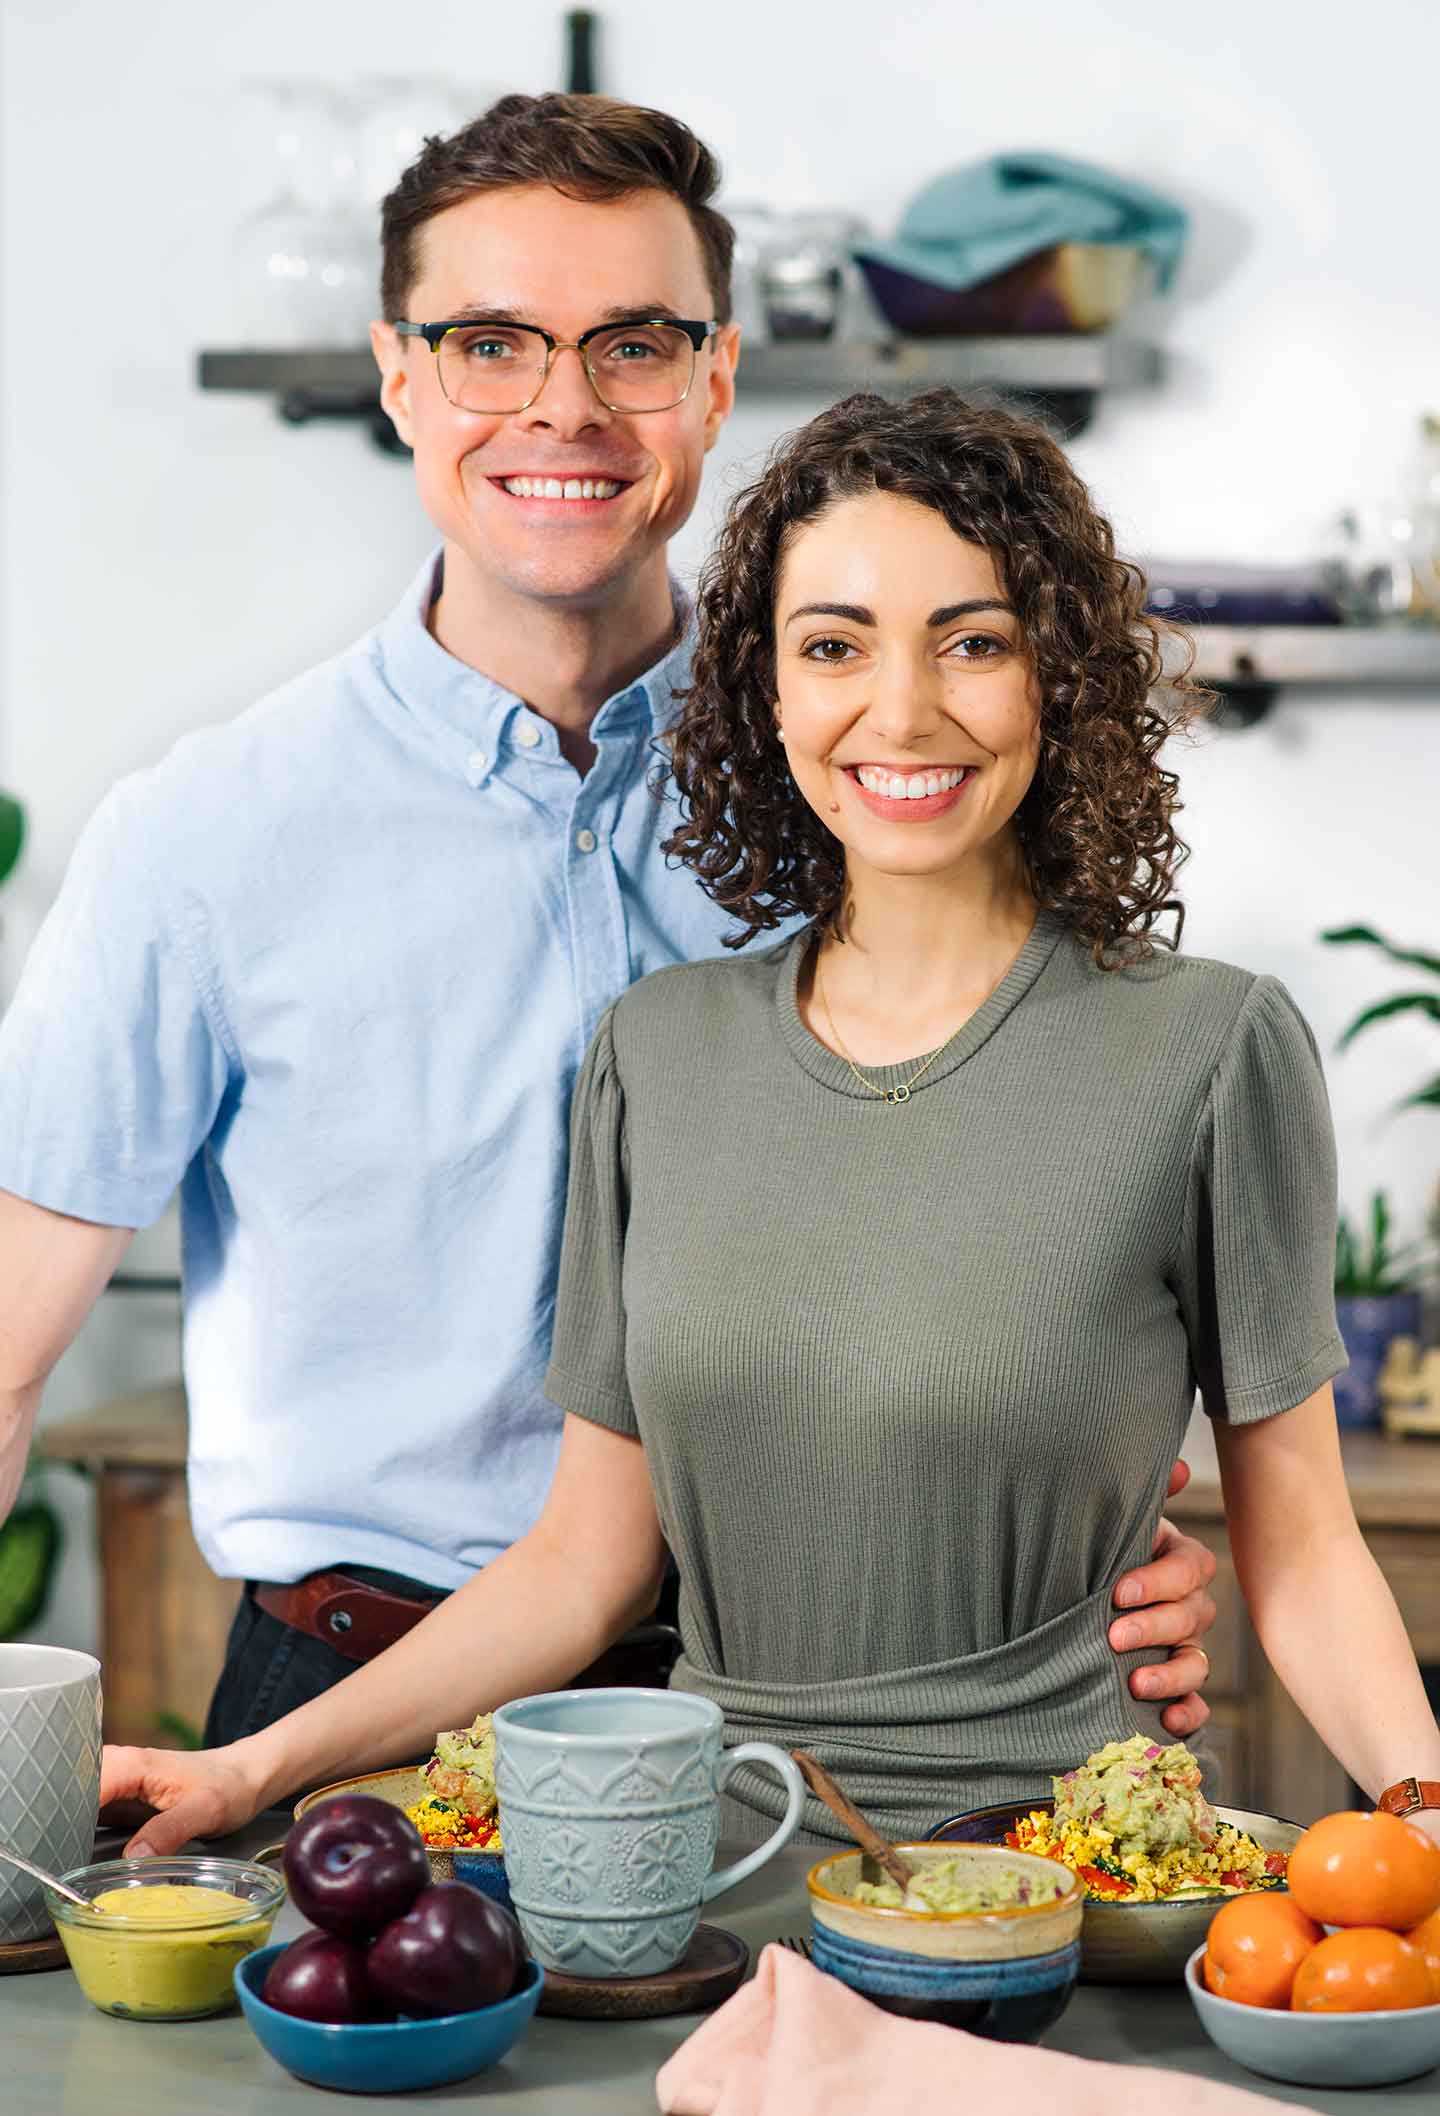 Bryan and Kathryn standing in their kitchen with tofu scramble, fruit, guacamole and coffee mugs sitting in front of them on a table.